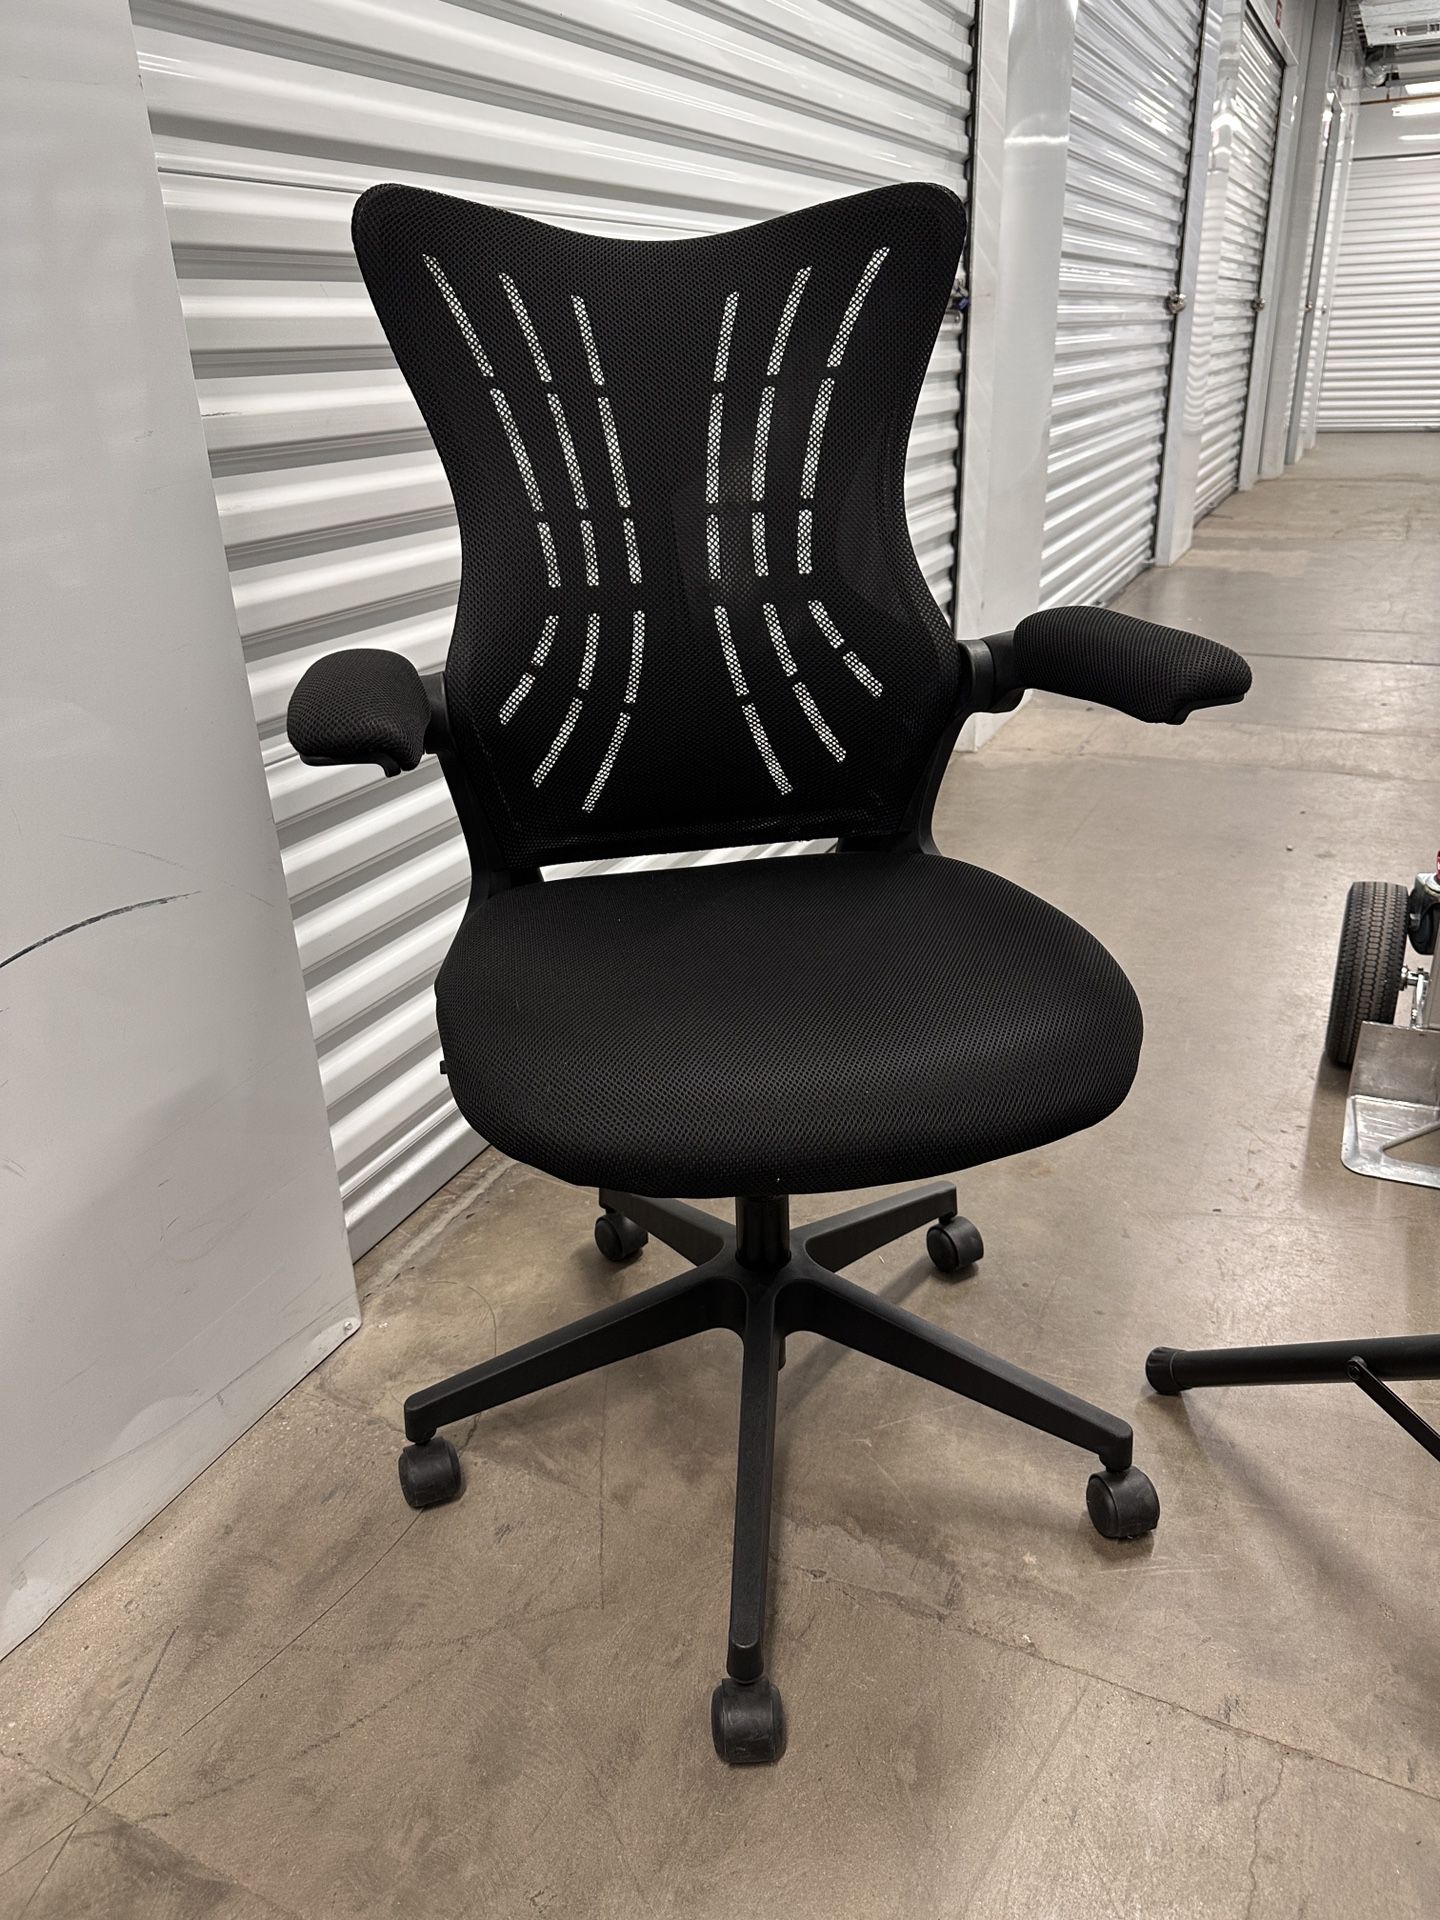 Like New (5) Black Office Chairs